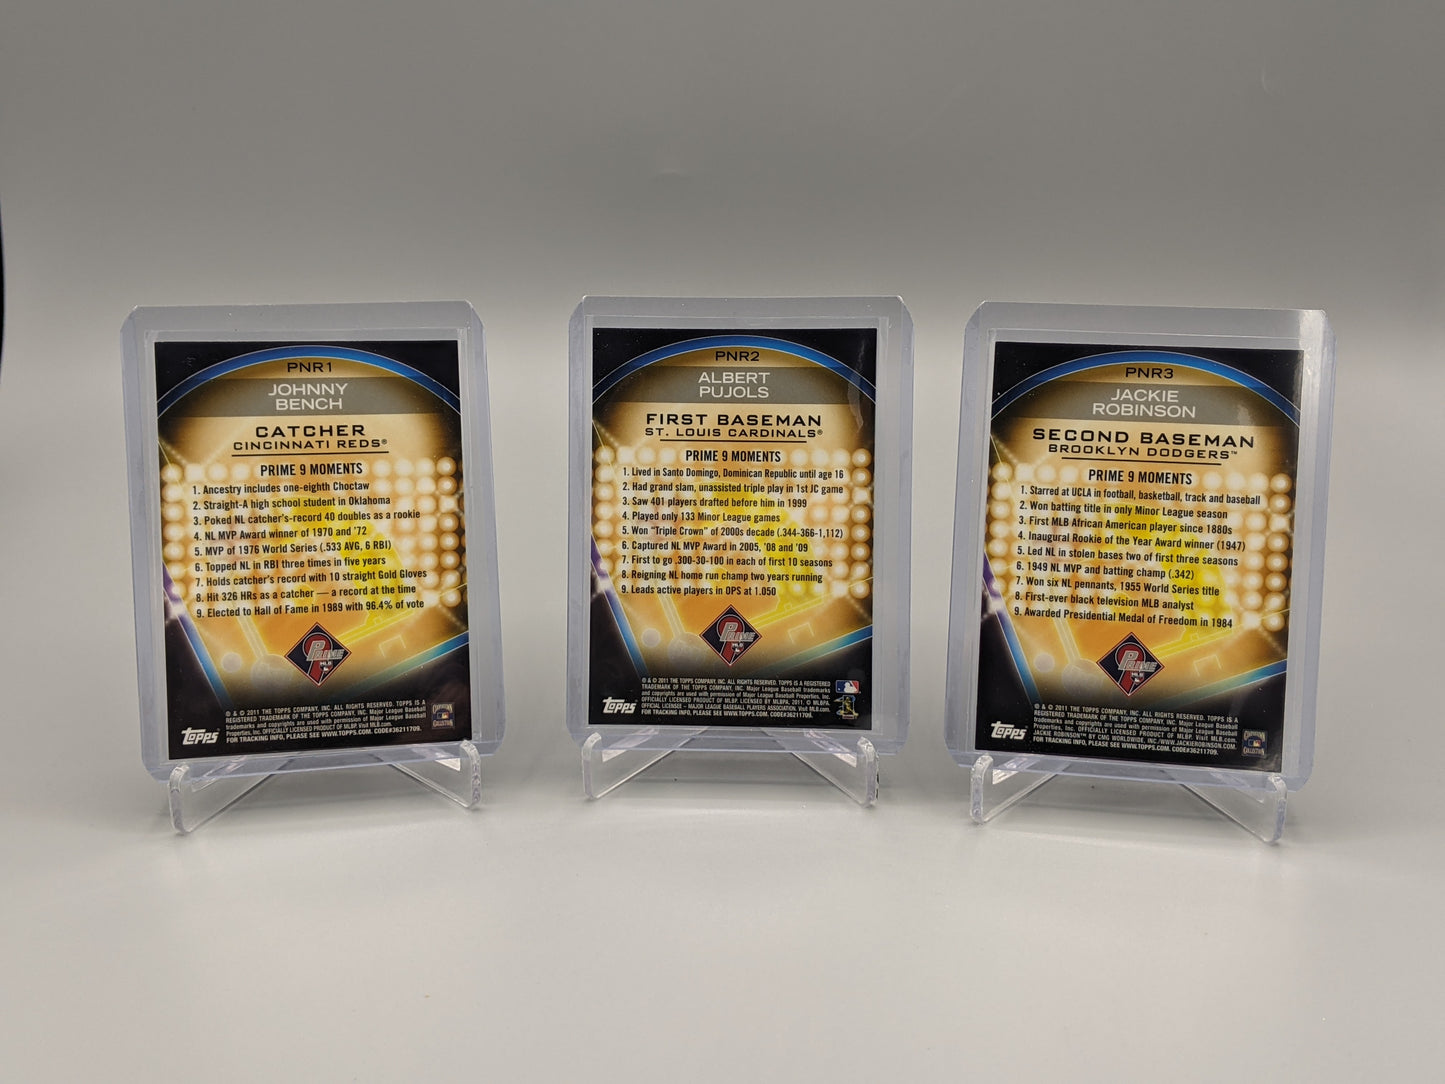 2011 Topps Prime 9 Complete Set (9) Cards, Mantle, Aaron, Koufax, Jeter + More